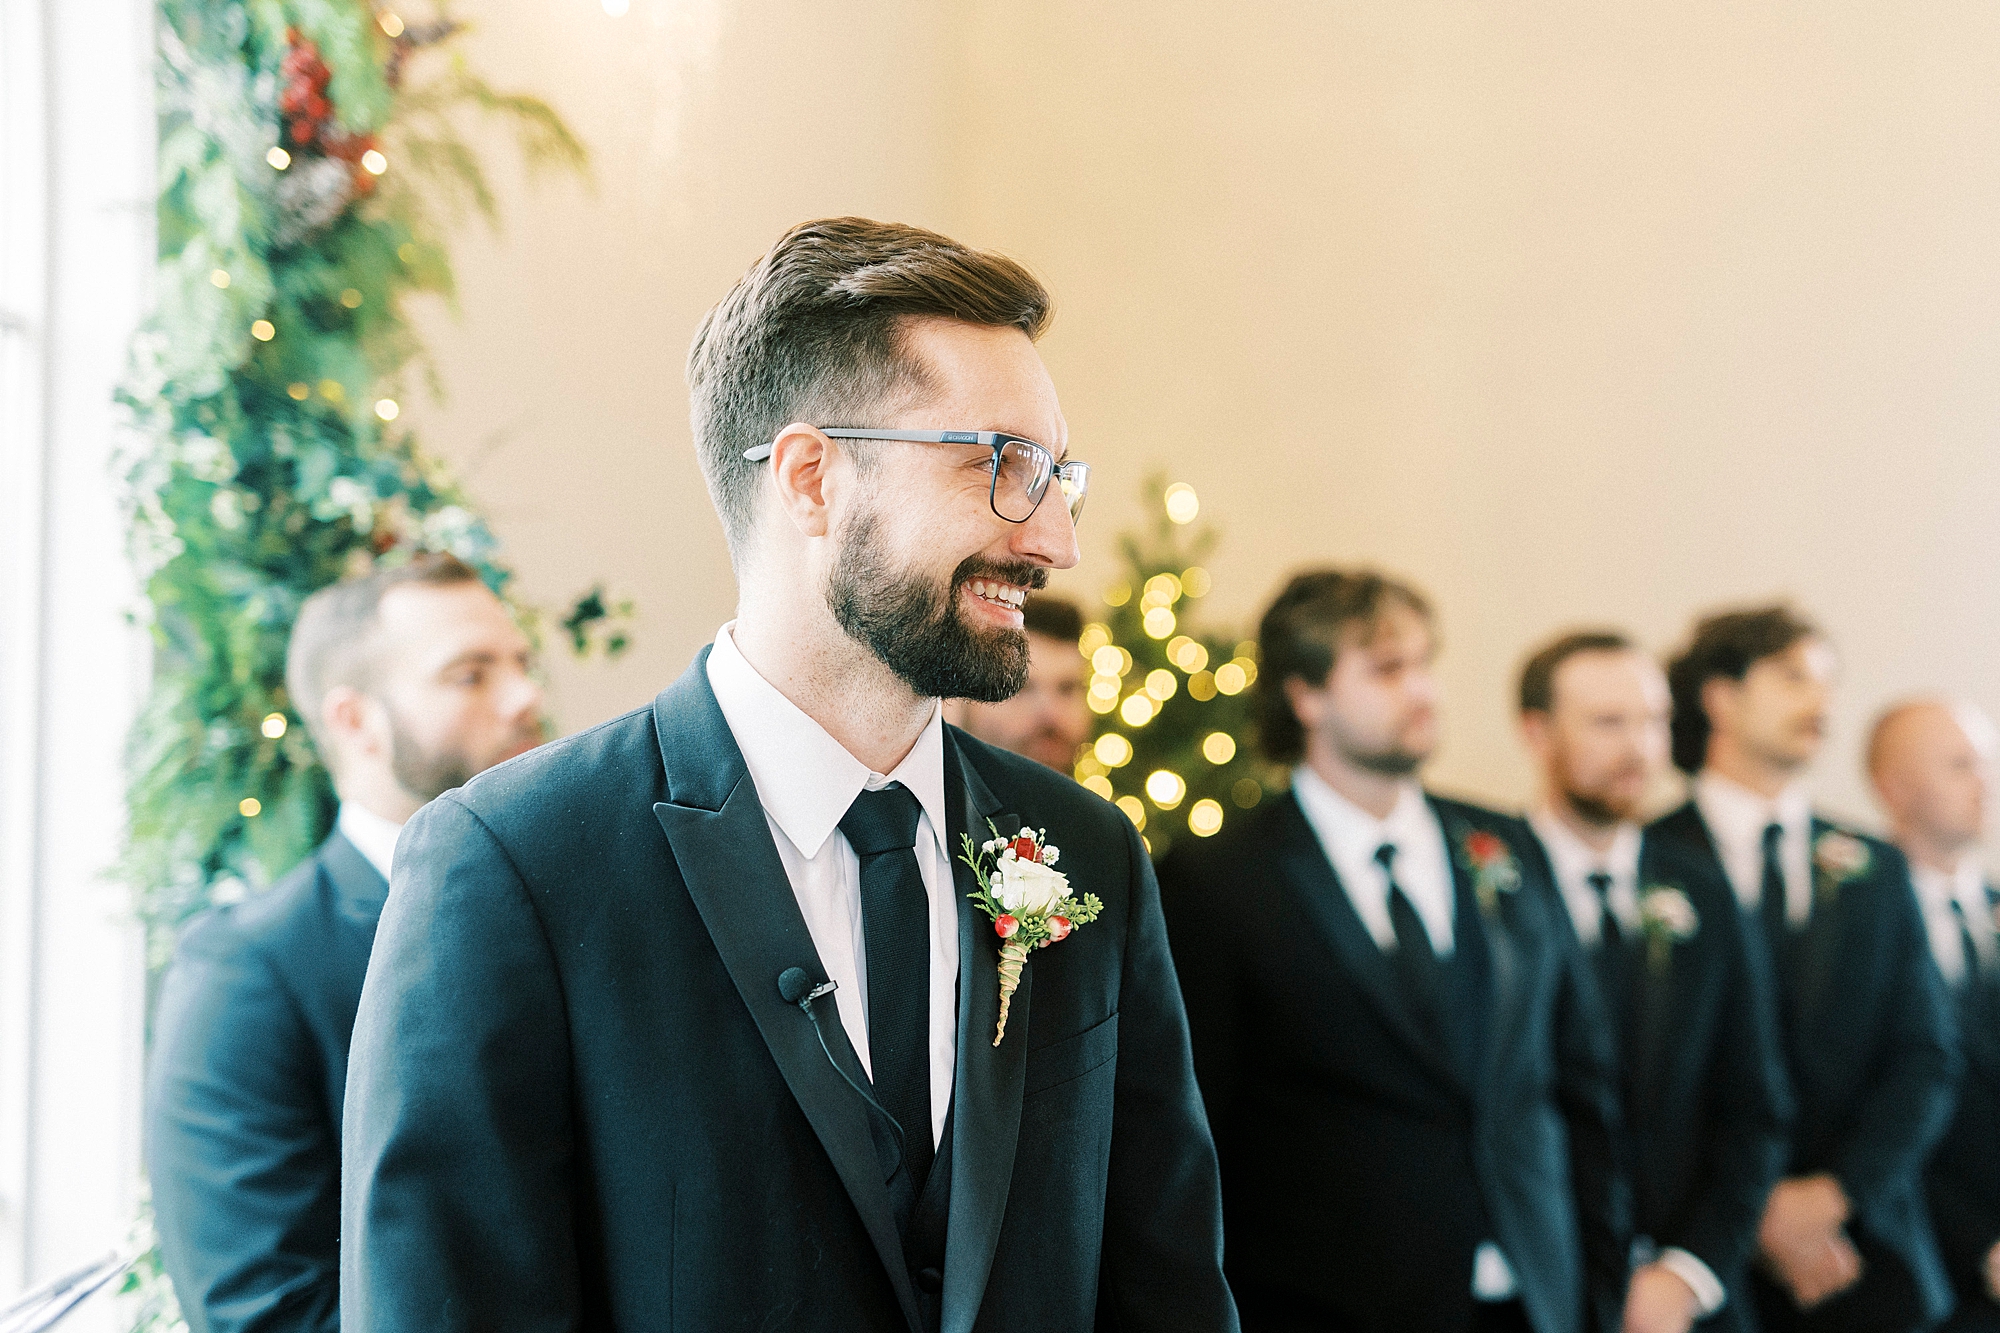 groom grins watching bride walk down aisle for winter Chickadee Hill Farms wedding ceremony